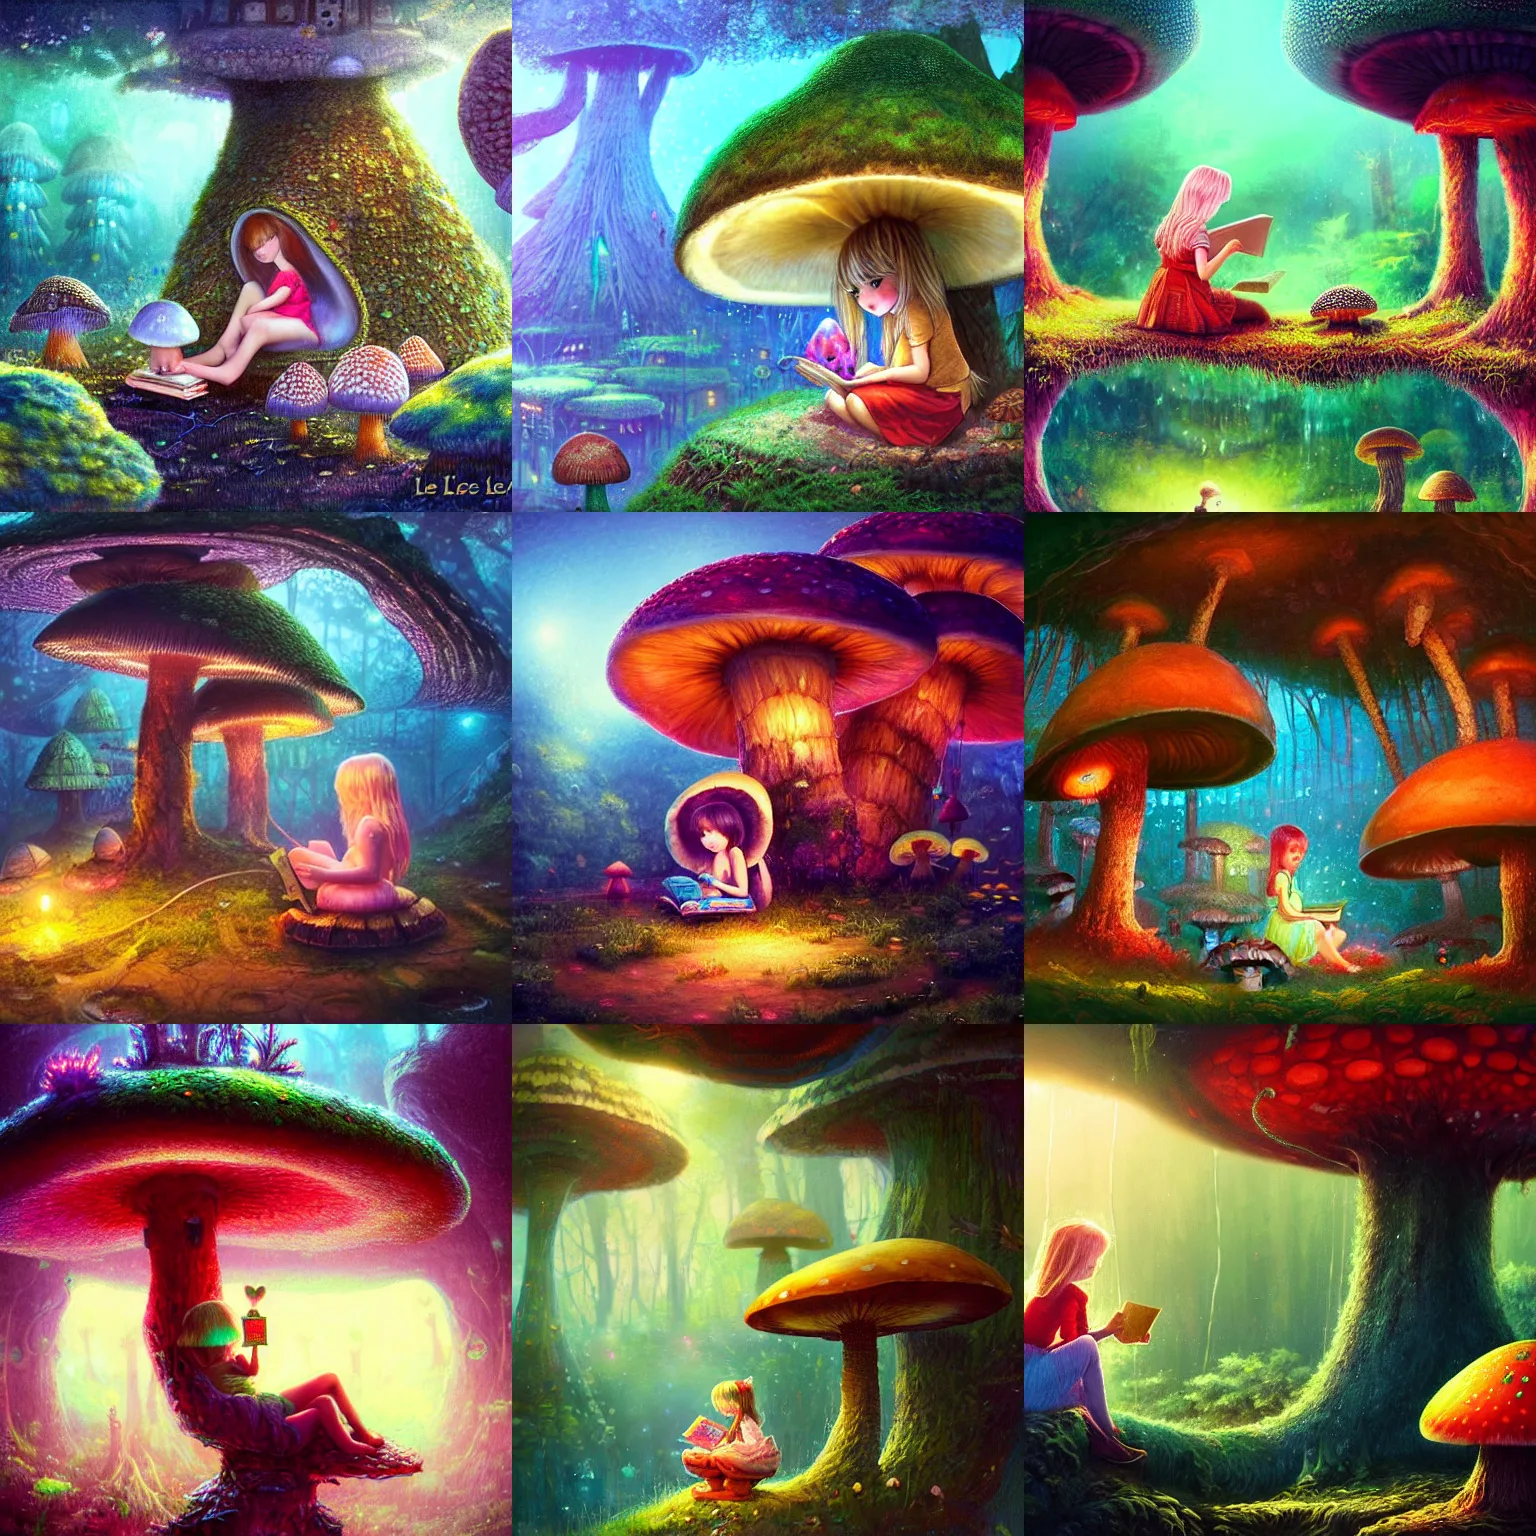 Prompt: ”cute young girl sitting by a mushroom reading a book, giant mushroom houses in a mysterious fantasy forest, [bioluminescense, rope bridges, art by wlop and paul lehr, cinematic, colorful]”